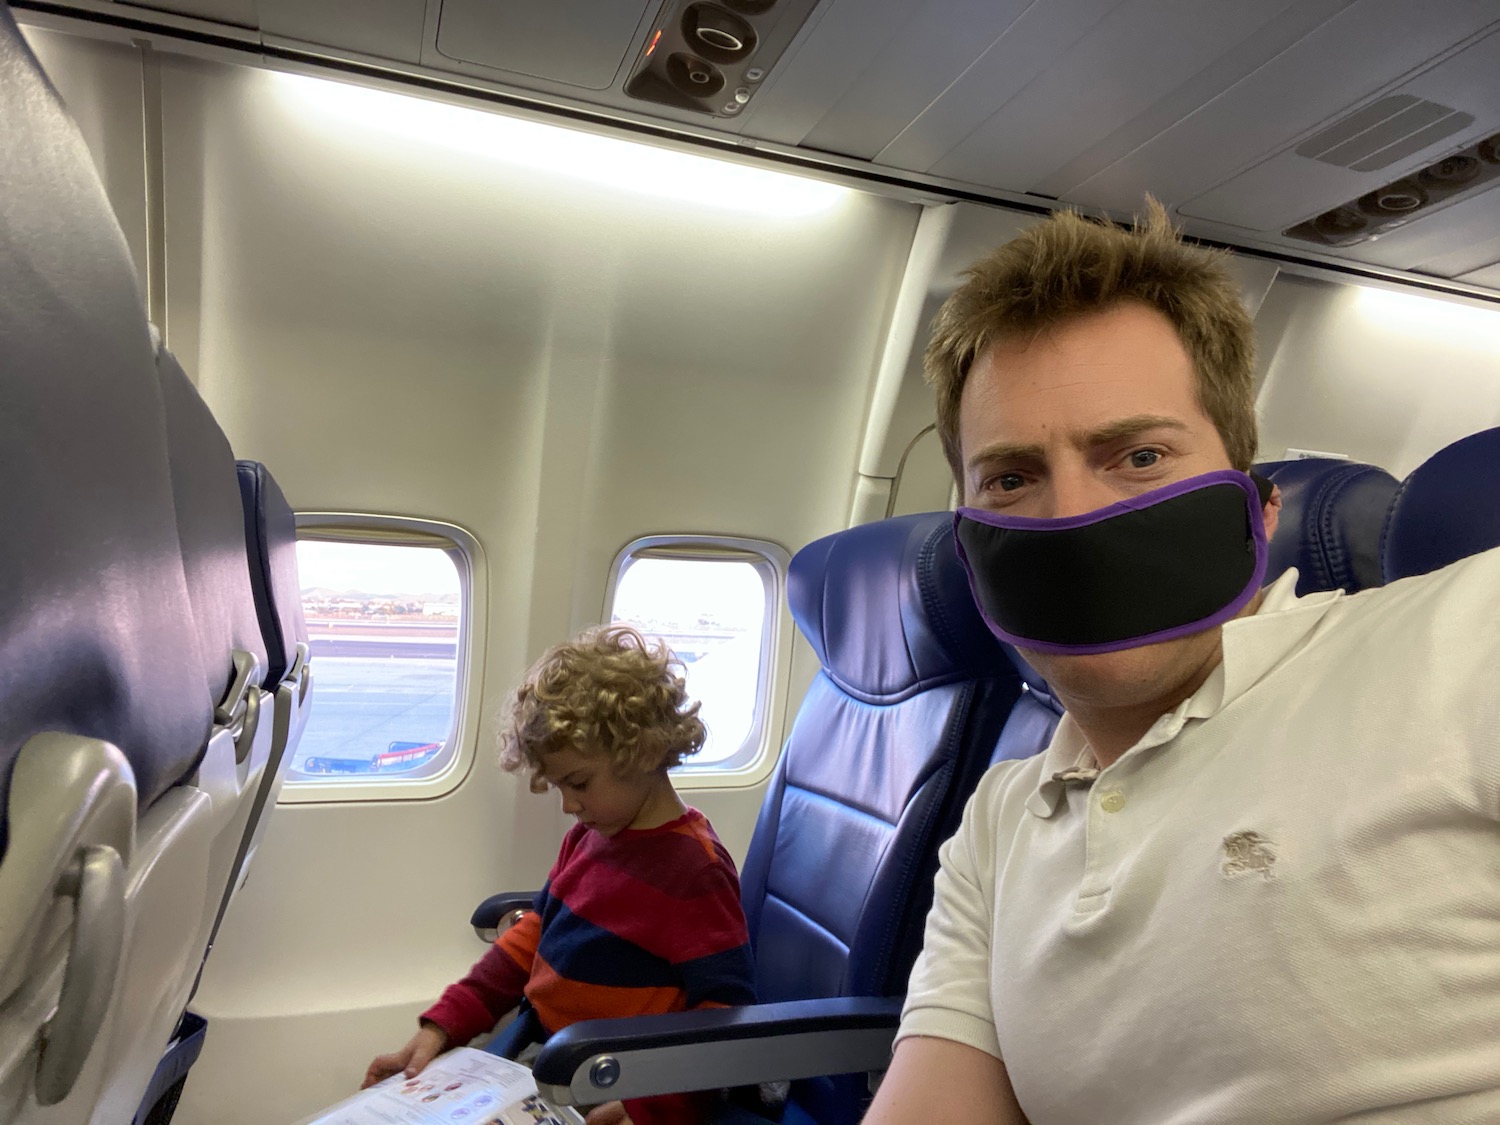 a man and child on an airplane